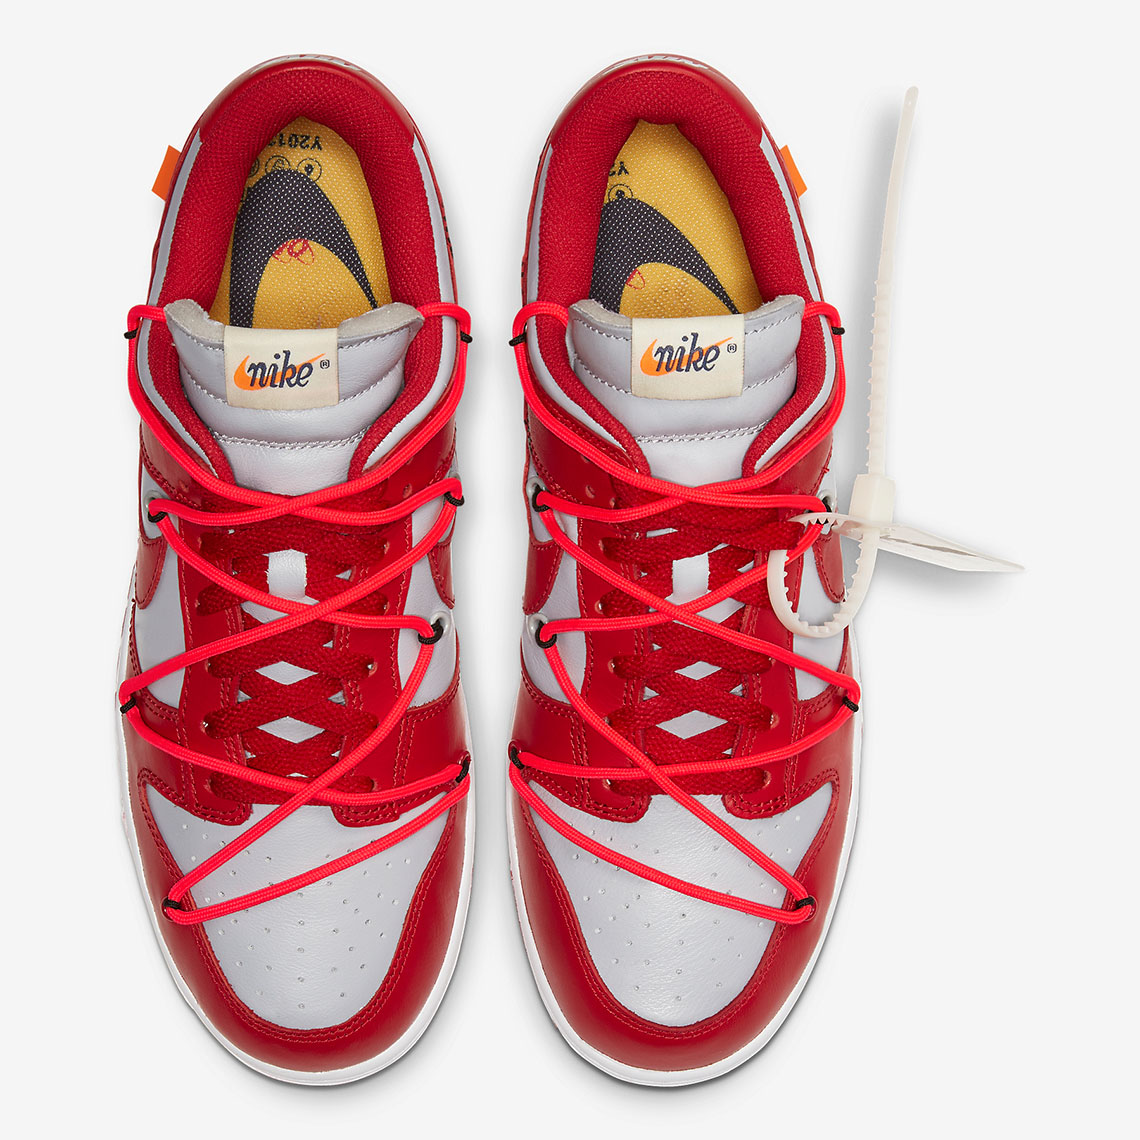 Off White Nike Dunk Low Unlv Ct0856 600 Official Images 5